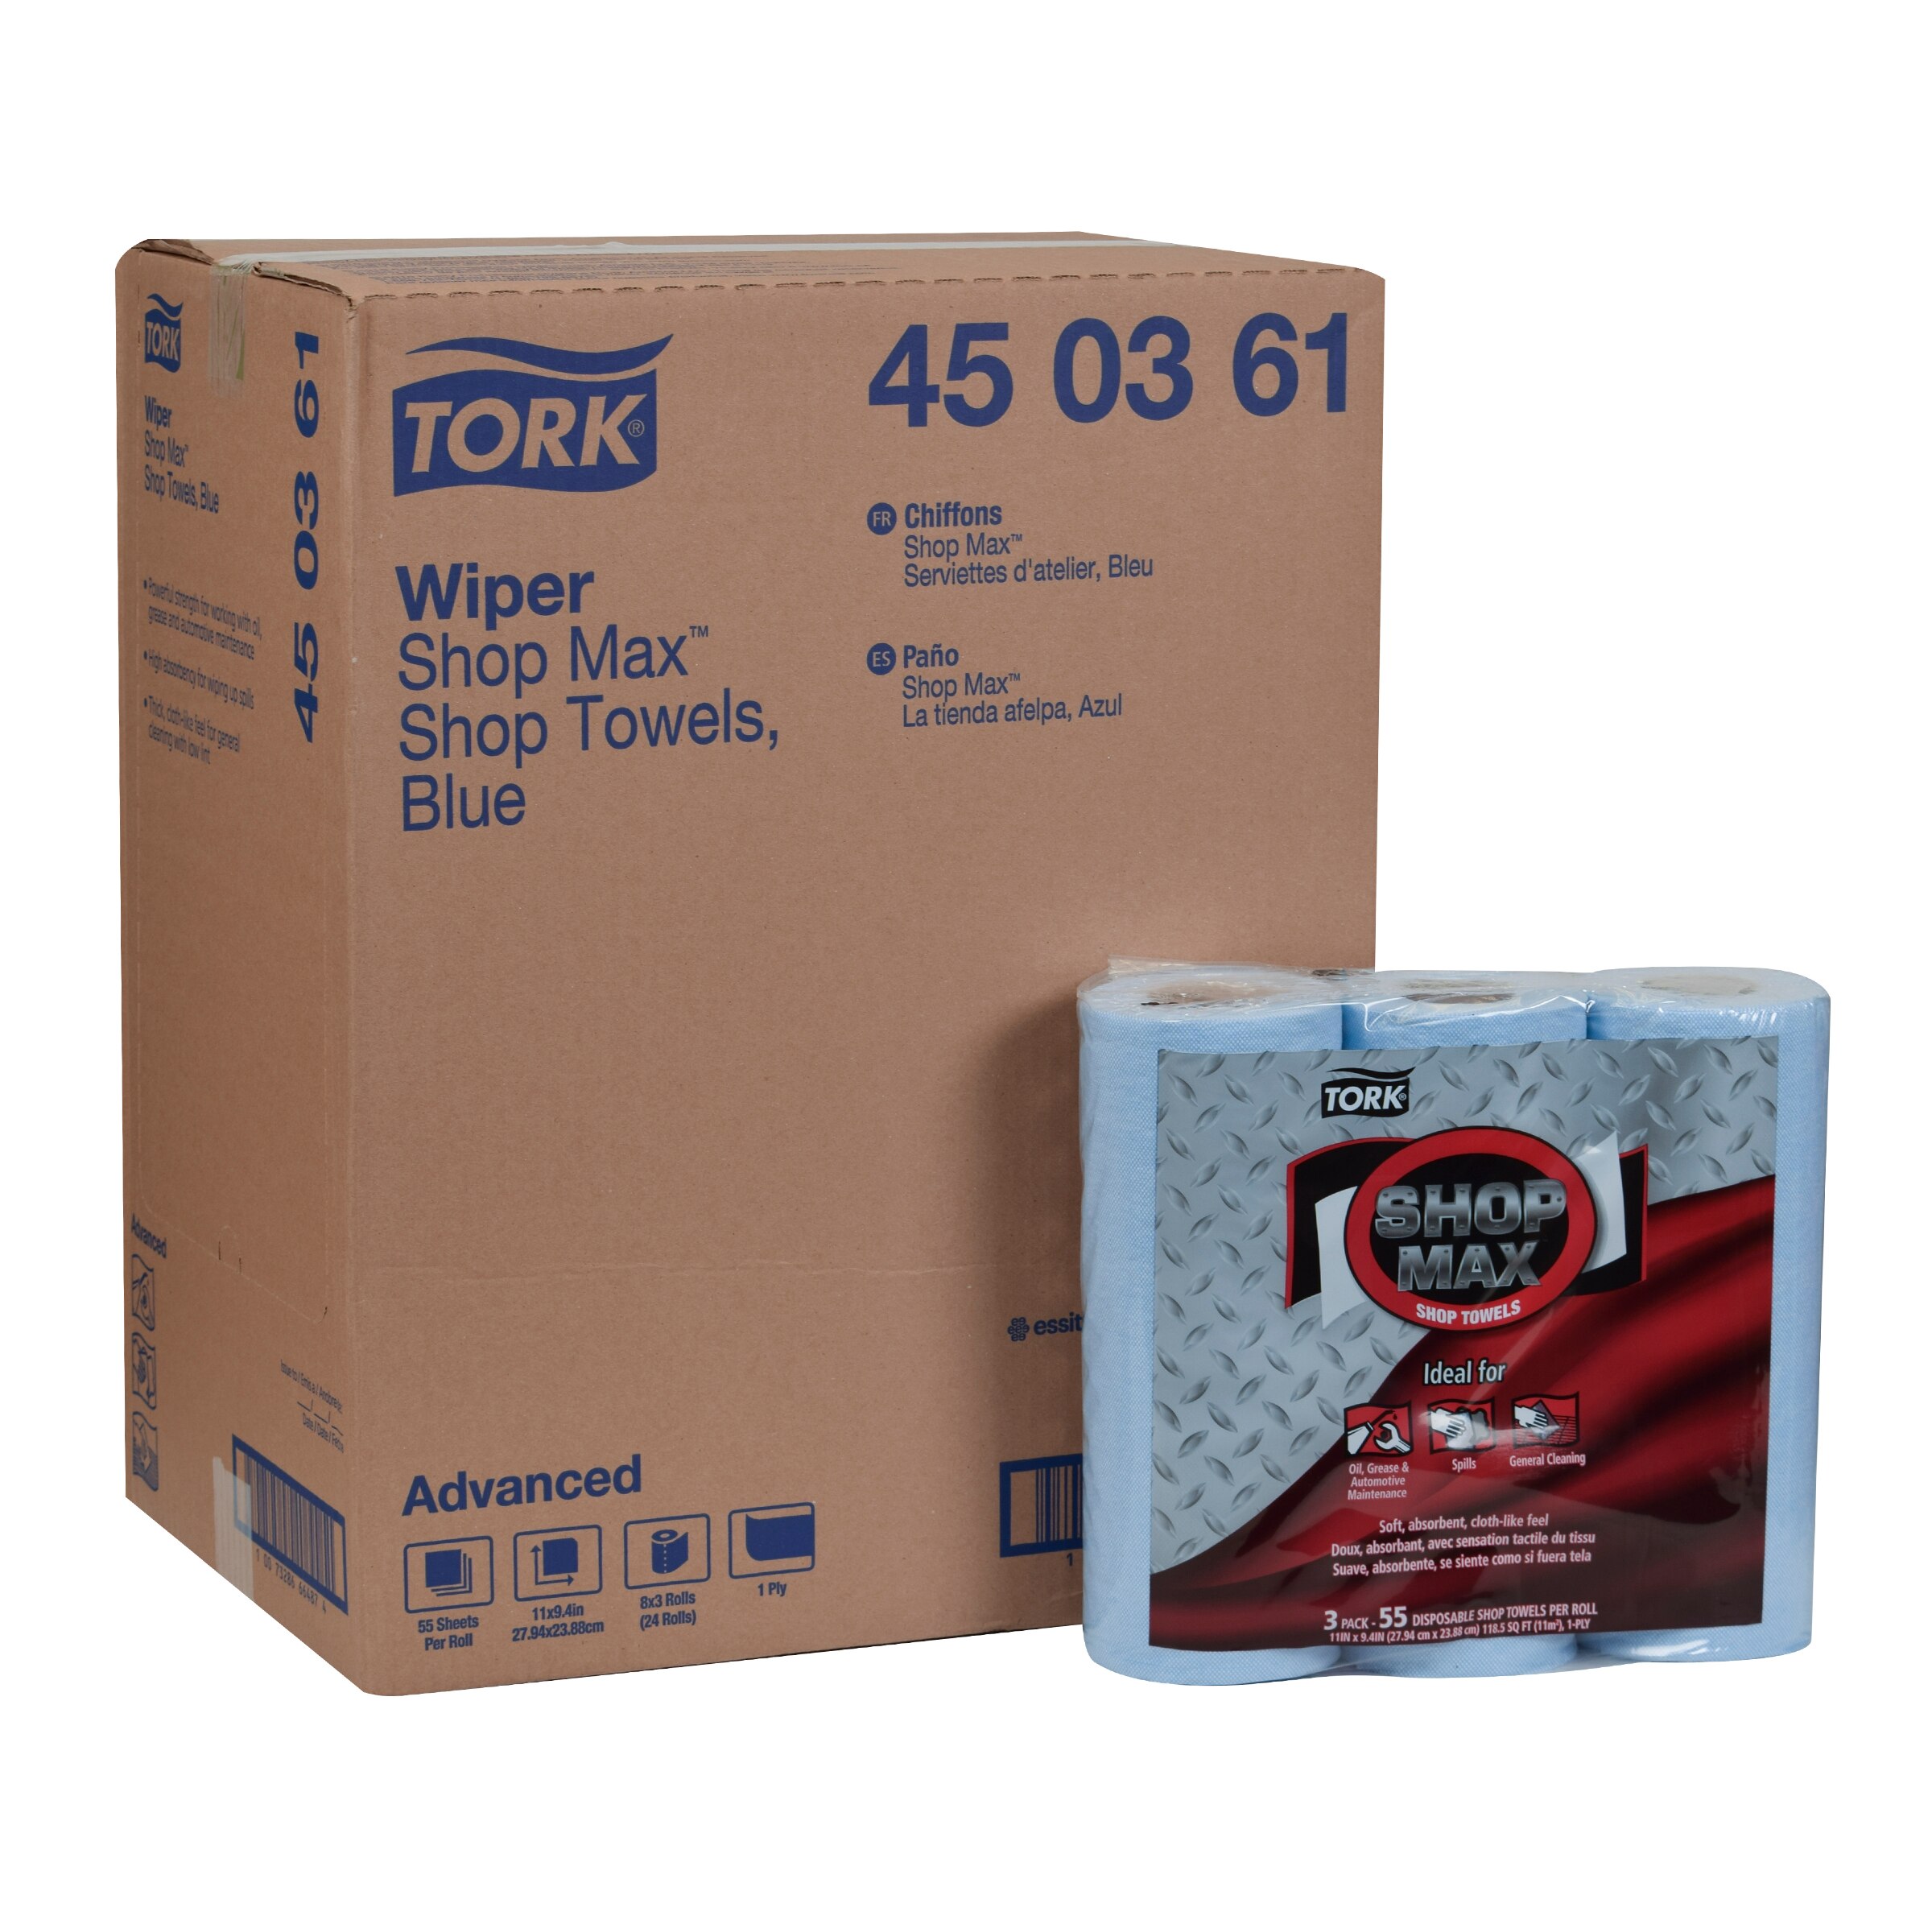 Tork ShopMax Wiper 450, Roll Towel | 450361 | Wipers and cloths 